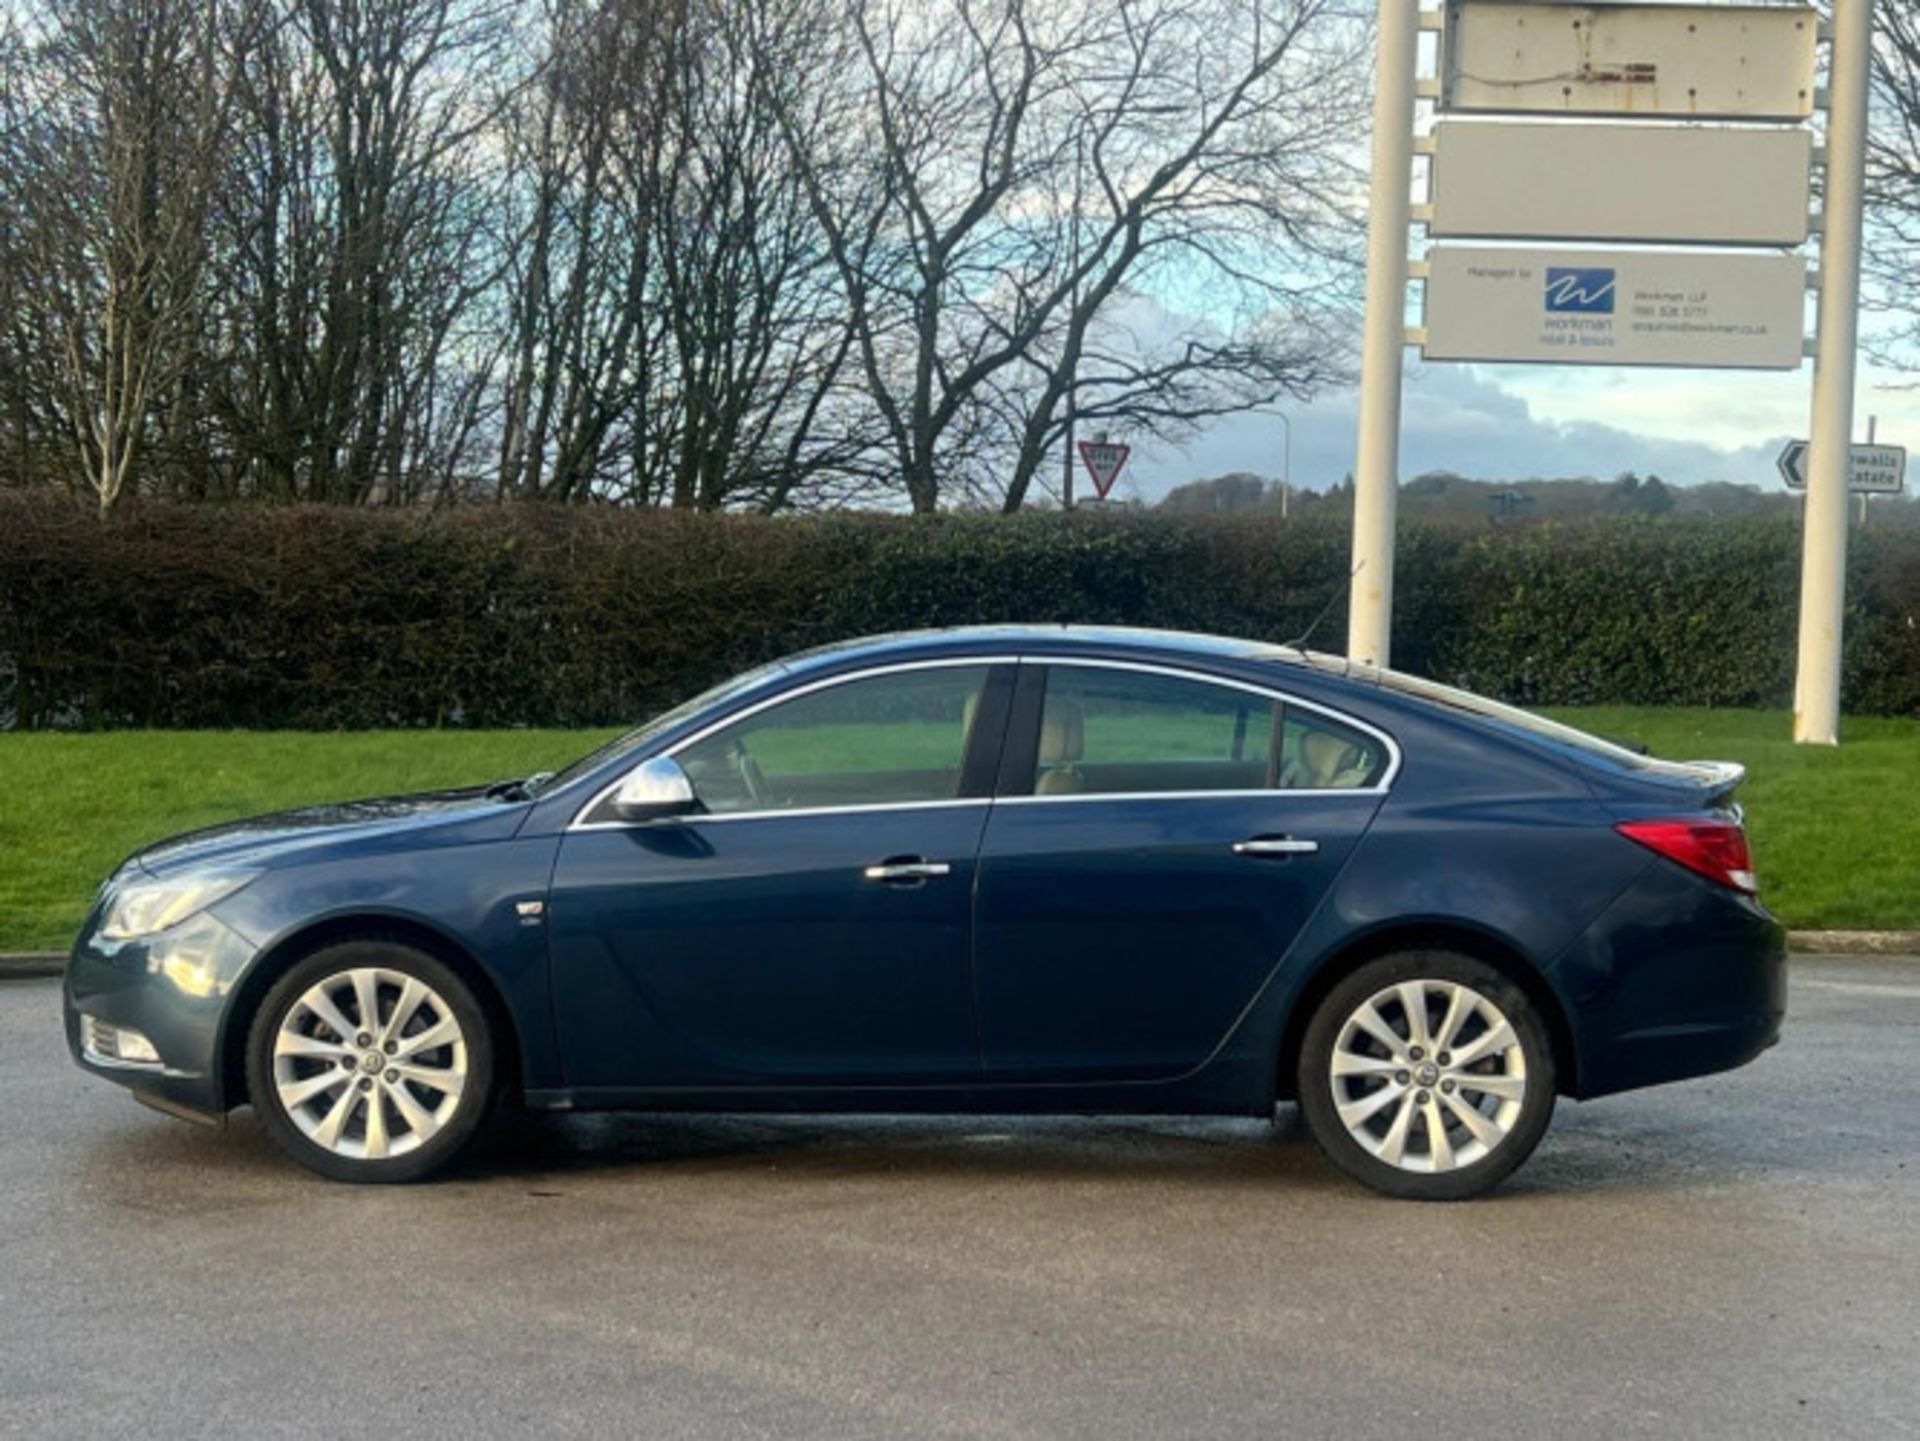 2012 VAUXHALL INSIGNIA 2.0 CDTI ELITE AUTO EURO 5 - DISCOVER EXCELLENCE >>--NO VAT ON HAMMER--<< - Image 116 of 120